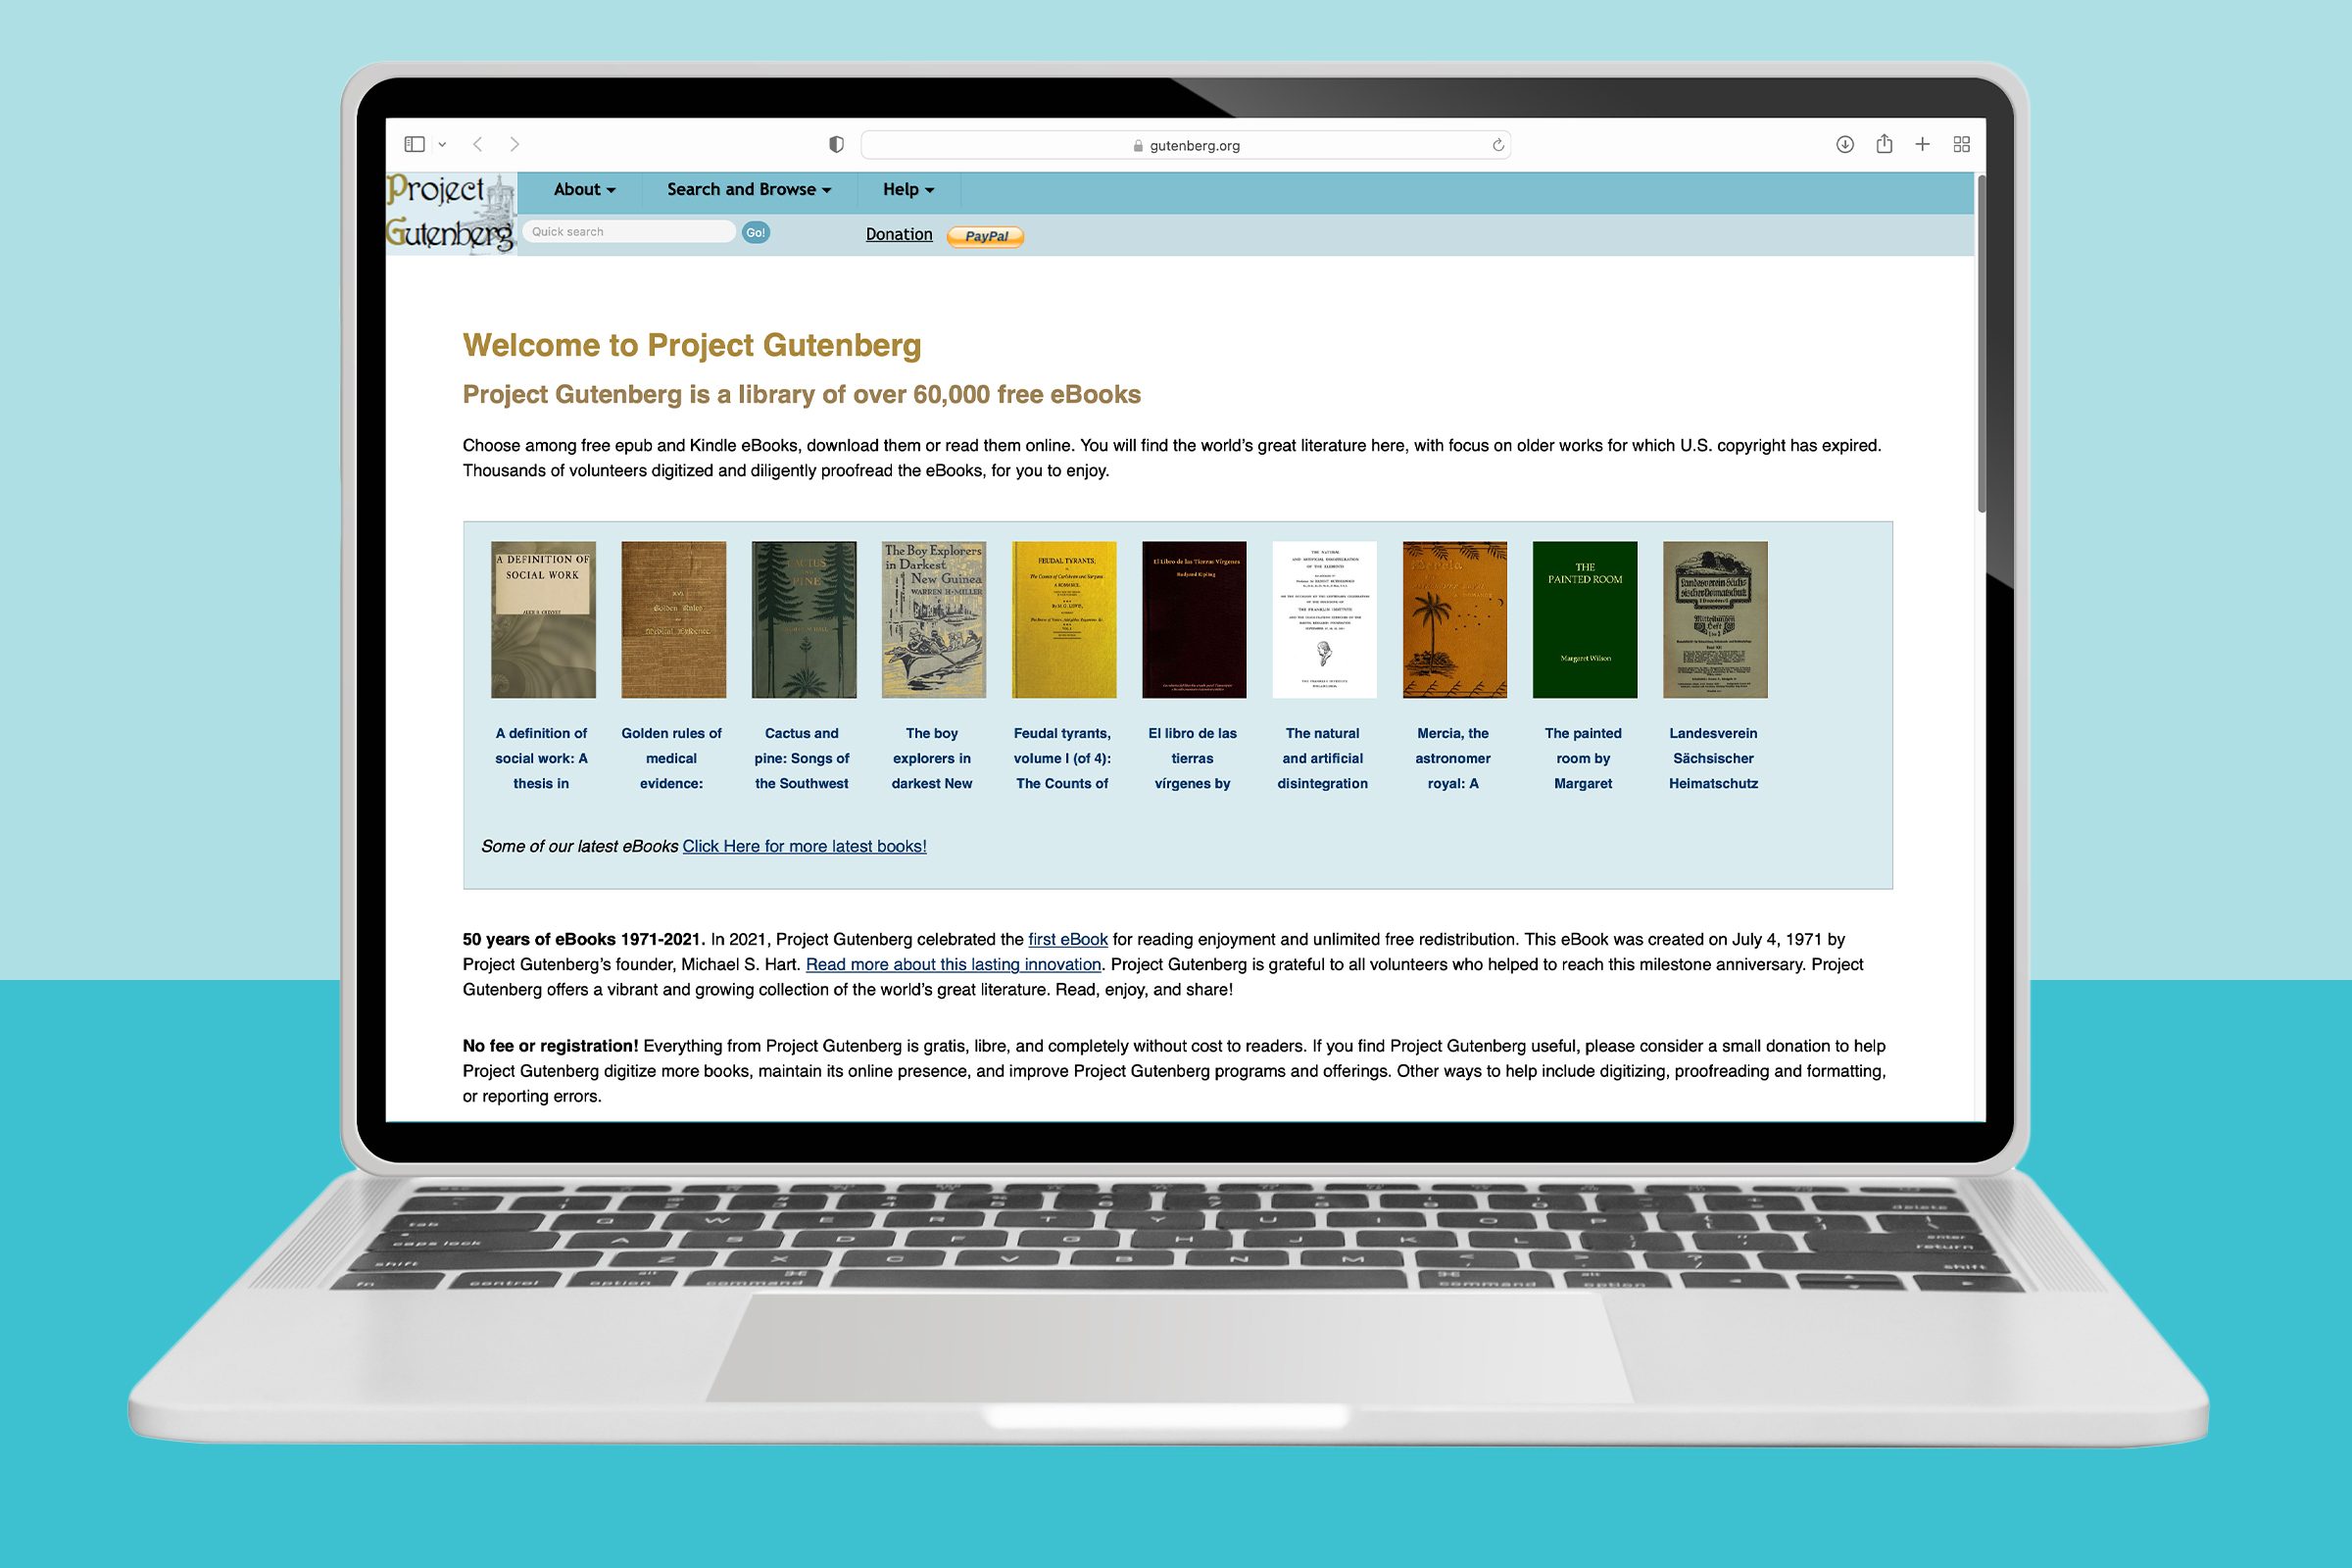 <p>Founded in 1971, <a href="https://www.gutenberg.org" rel="noopener noreferrer">Project Gutenberg</a> was the first provider of free electronic books. Today, it's a volunteer-run nonprofit that legally offers 60,000 books in the public domain. This means you can easily search for and access a ton of the best <a href="https://www.rd.com/list/classic-books/" rel="noopener noreferrer">classic books</a> with expired copyrights, like F. Scott Fitzgerald's <em>The Great Gatsby</em> and Jane Austen's <em>Pride and Prejudice</em>. A favorite resource for students on a tight budget and classic book lovers alike, Project Gutenberg allows you to read directly on the website, download as EPUB files to your device or upload directly to a cloud storage account like Google Drive, Dropbox or OneDrive. And, of course, you can send the books to your Kindle device too.</p> <p><strong>Pros:</strong></p> <ul> <li>Offers multiple download/read options, including EPUB and Kindle e-books</li> <li>Can upload directly to cloud storage</li> <li>No registration necessary</li> <li>No app necessary</li> <li>No return deadlines</li> </ul> <p><strong>Cons:</strong></p> <ul> <li>Mostly on older books</li> <li>Not the most eye-catching user interface</li> </ul> <p class="listicle-page__cta-button-shop"><a class="shop-btn" href="https://www.gutenberg.org/">Read Now</a></p>